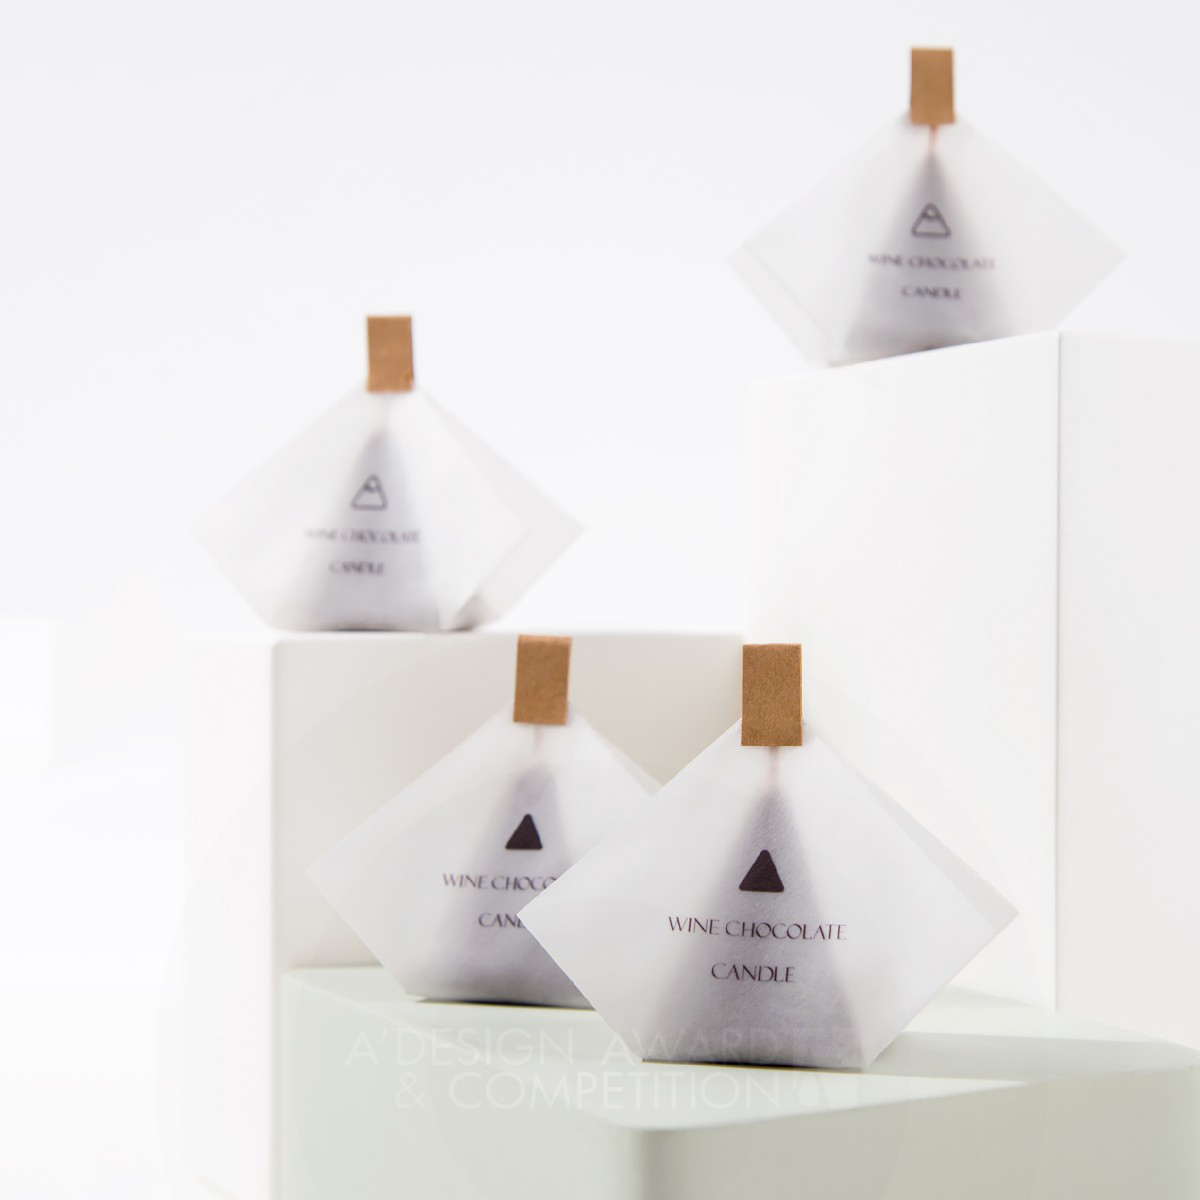 Small Bag Candle Packaging by Fang Liangfang